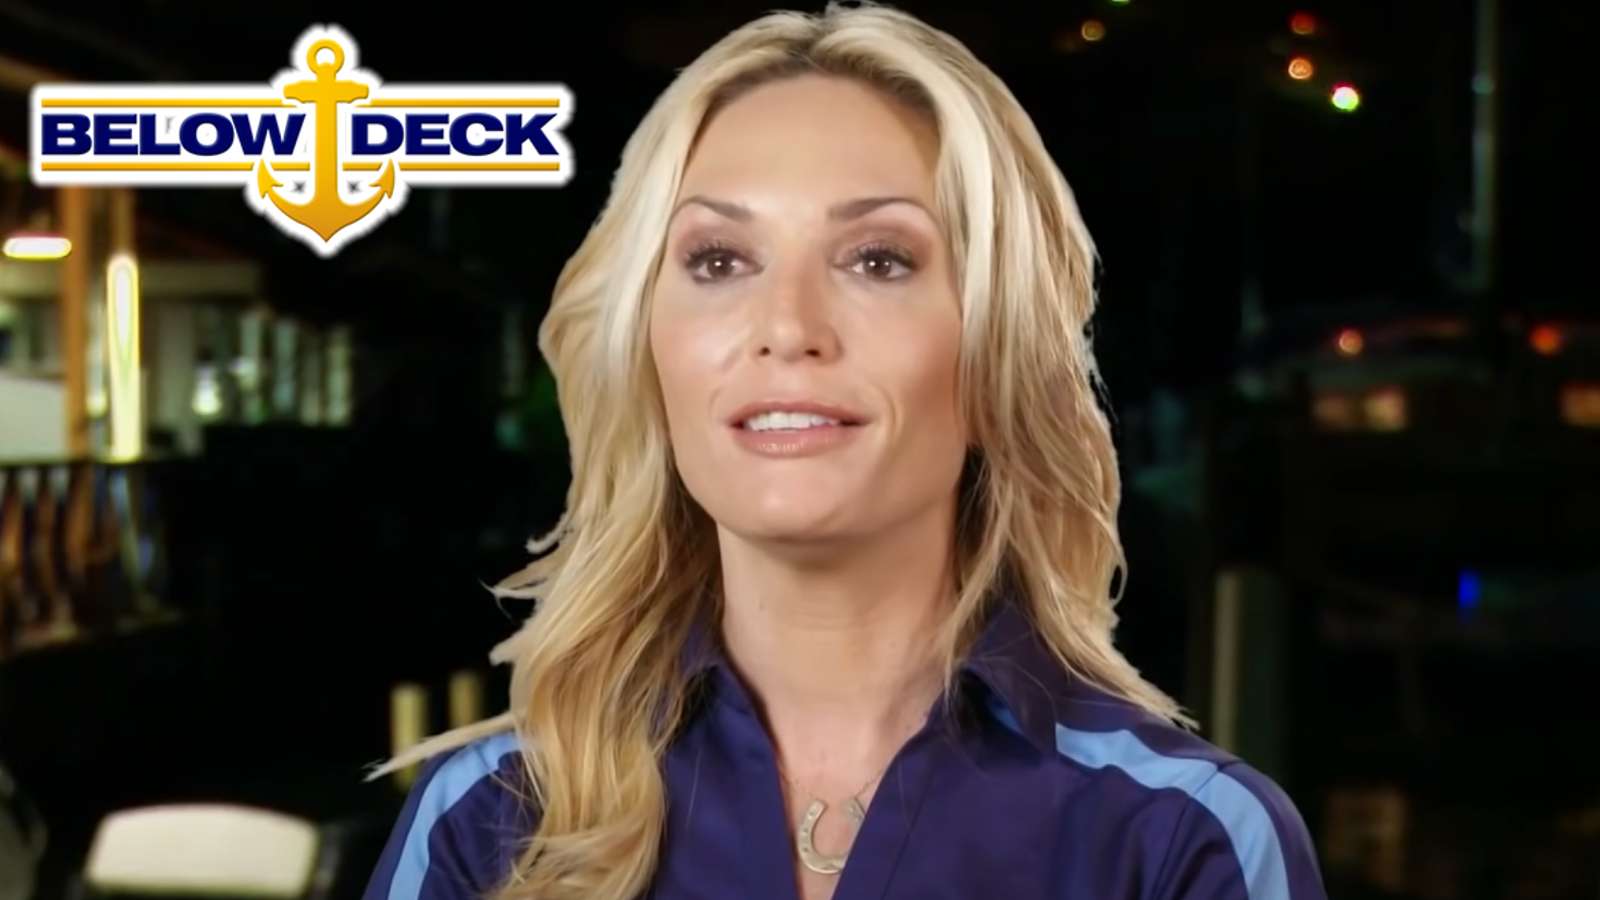 What happened to Kate after Below Deck? Baby daddy rumors & life